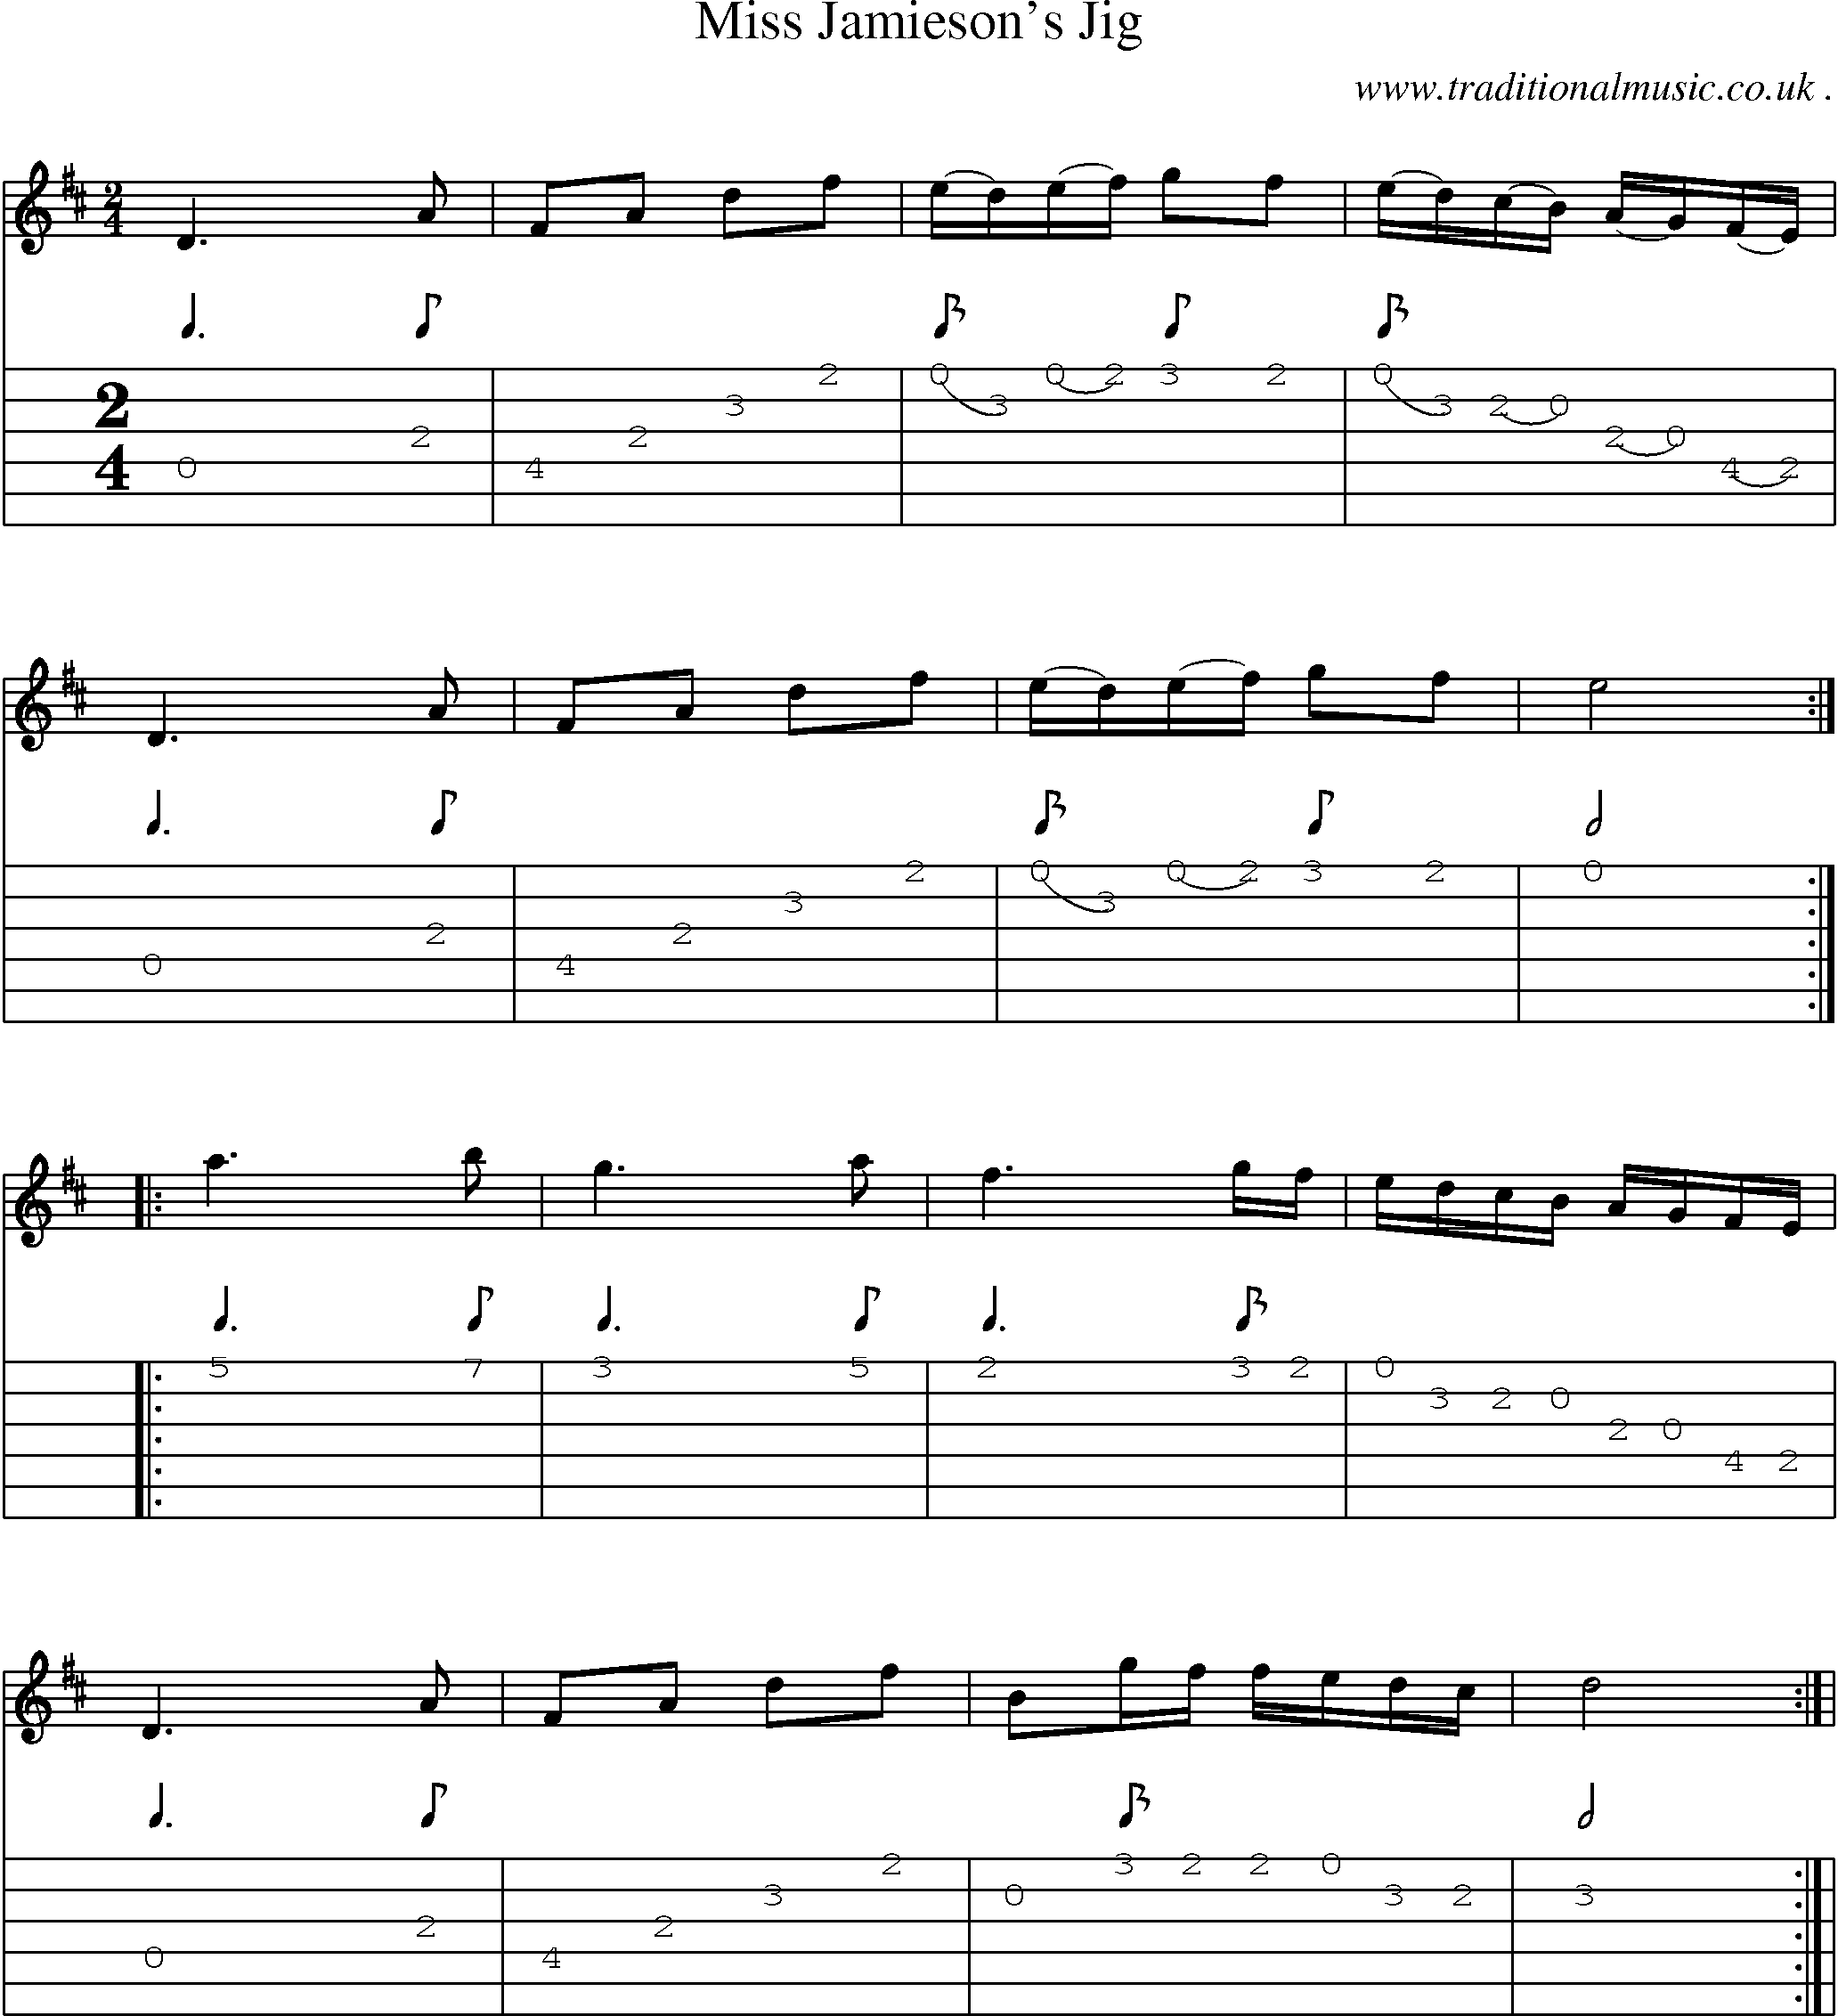 Sheet-Music and Guitar Tabs for Miss Jamiesons Jig